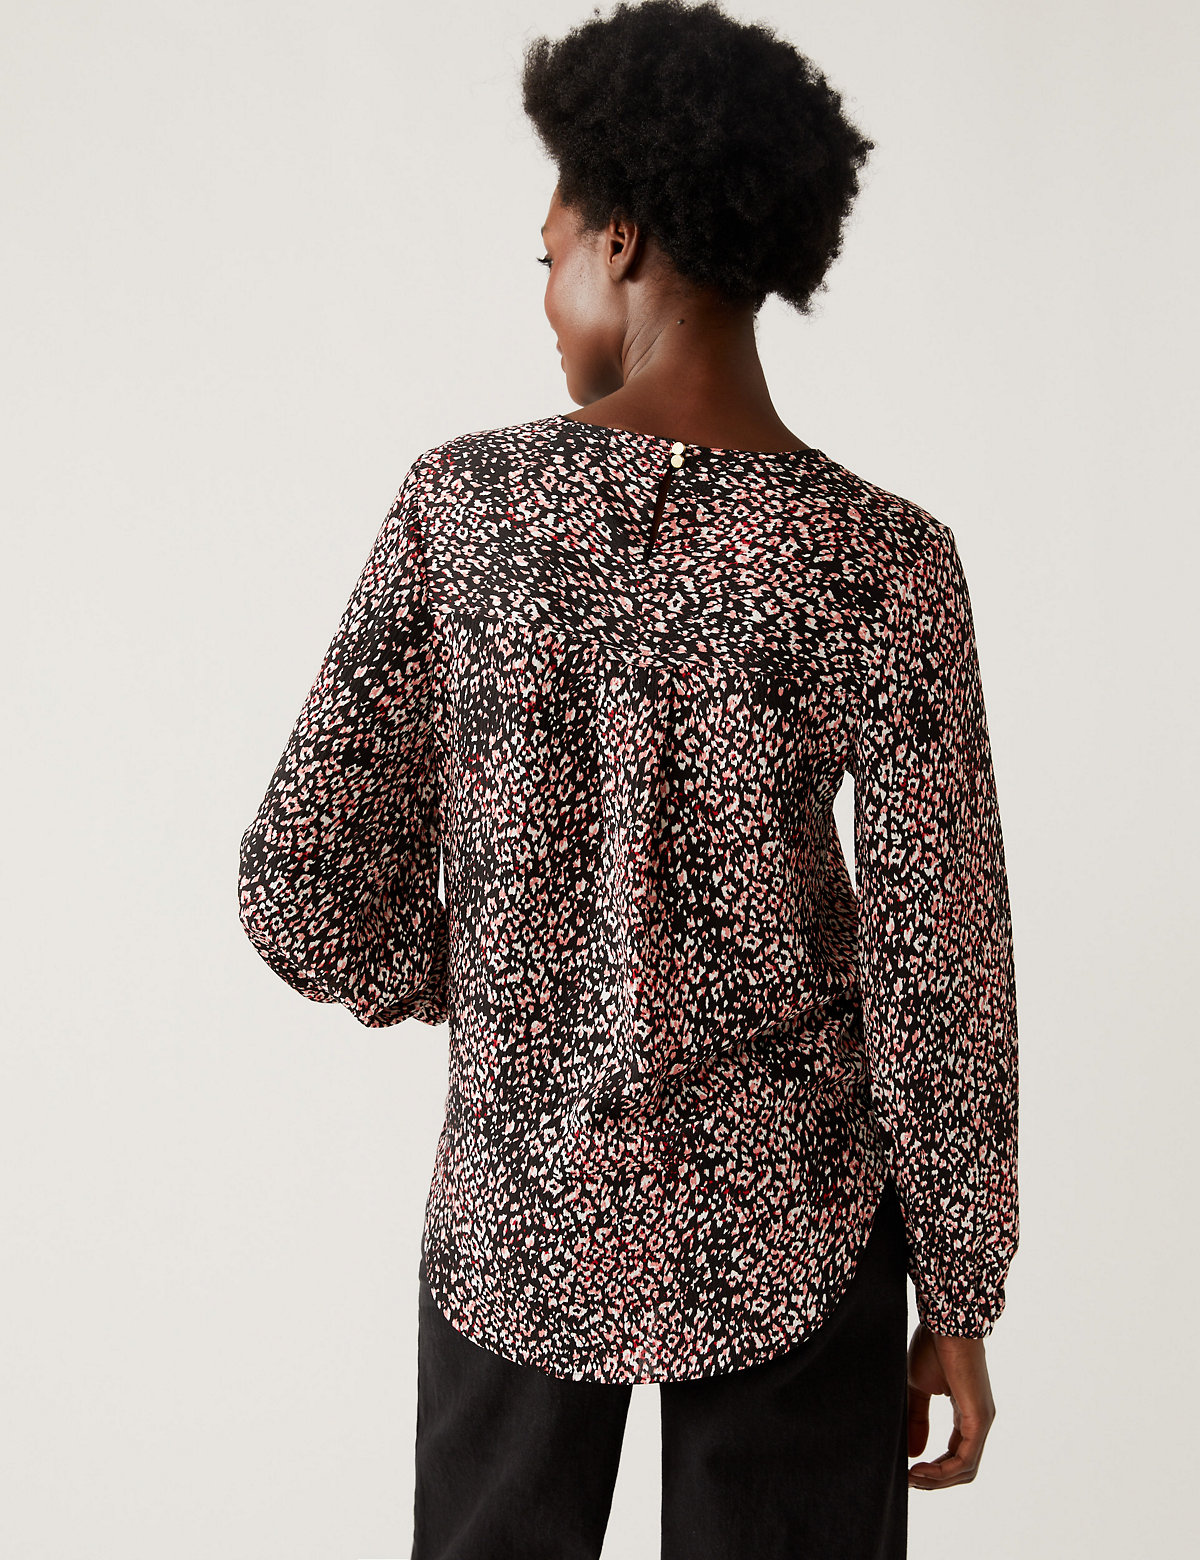 Woven Printed Round Neck Top